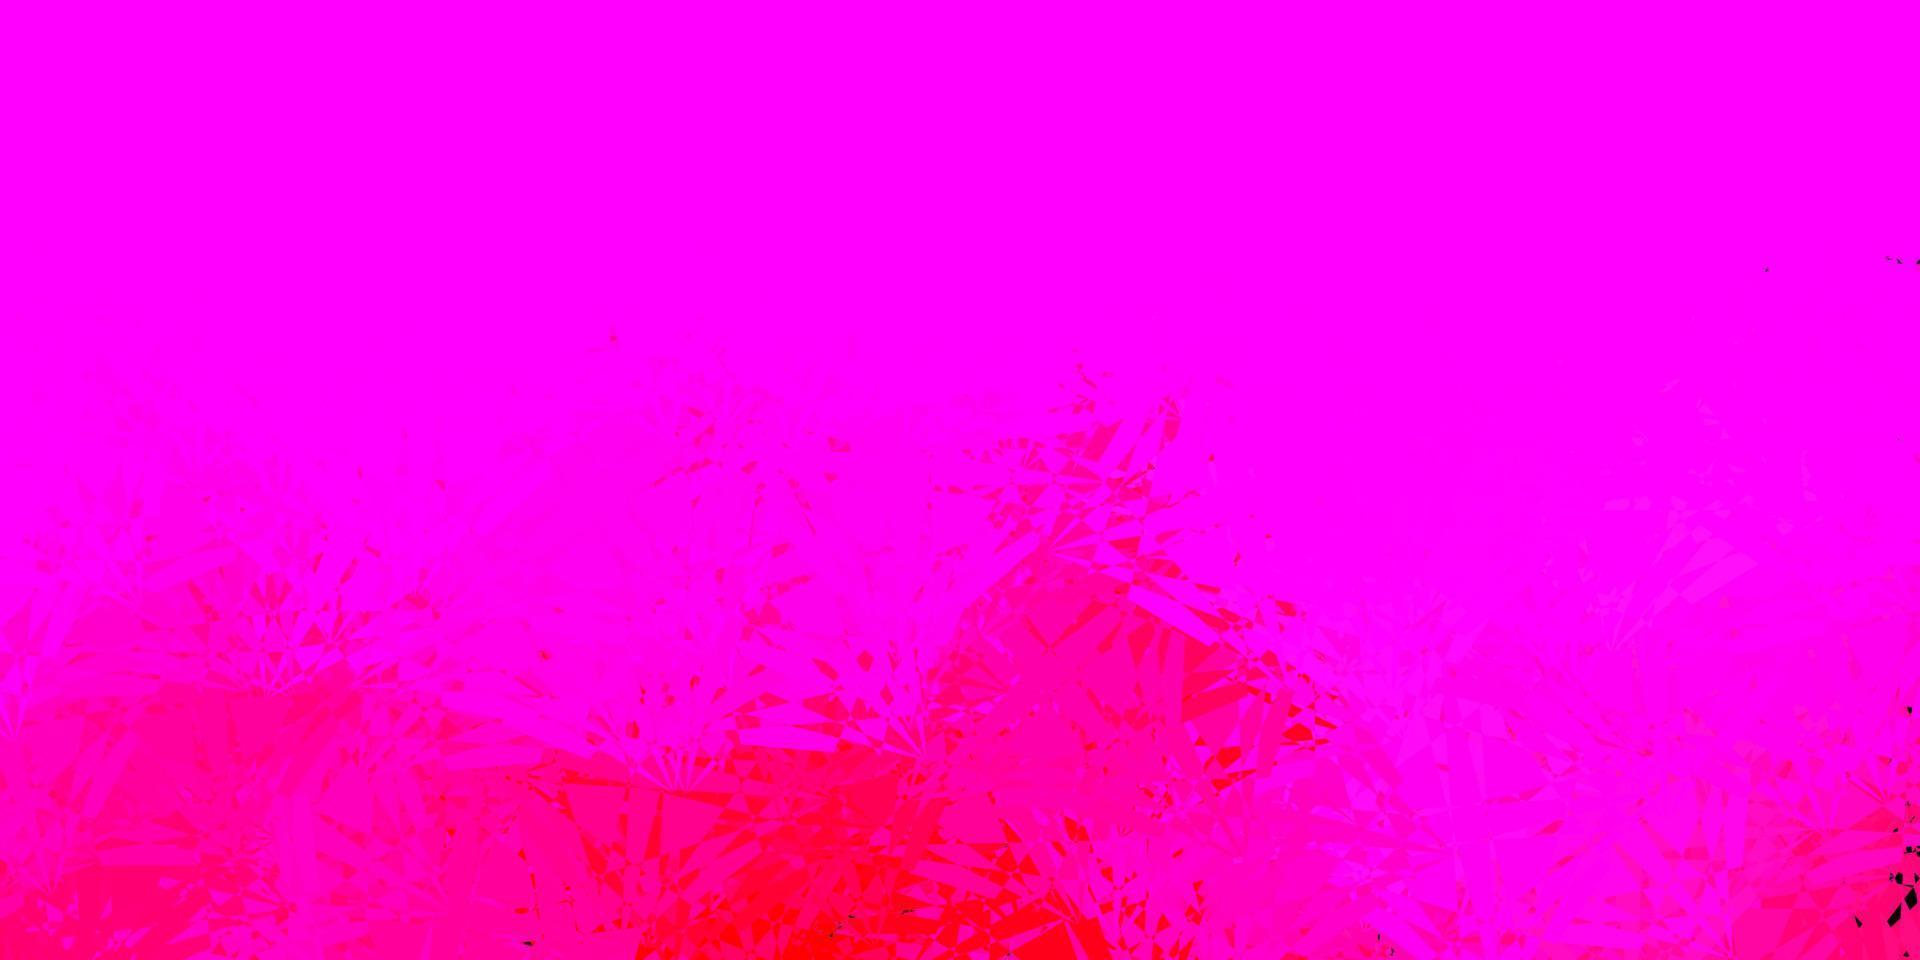 Dark Pink vector background with polygonal forms.